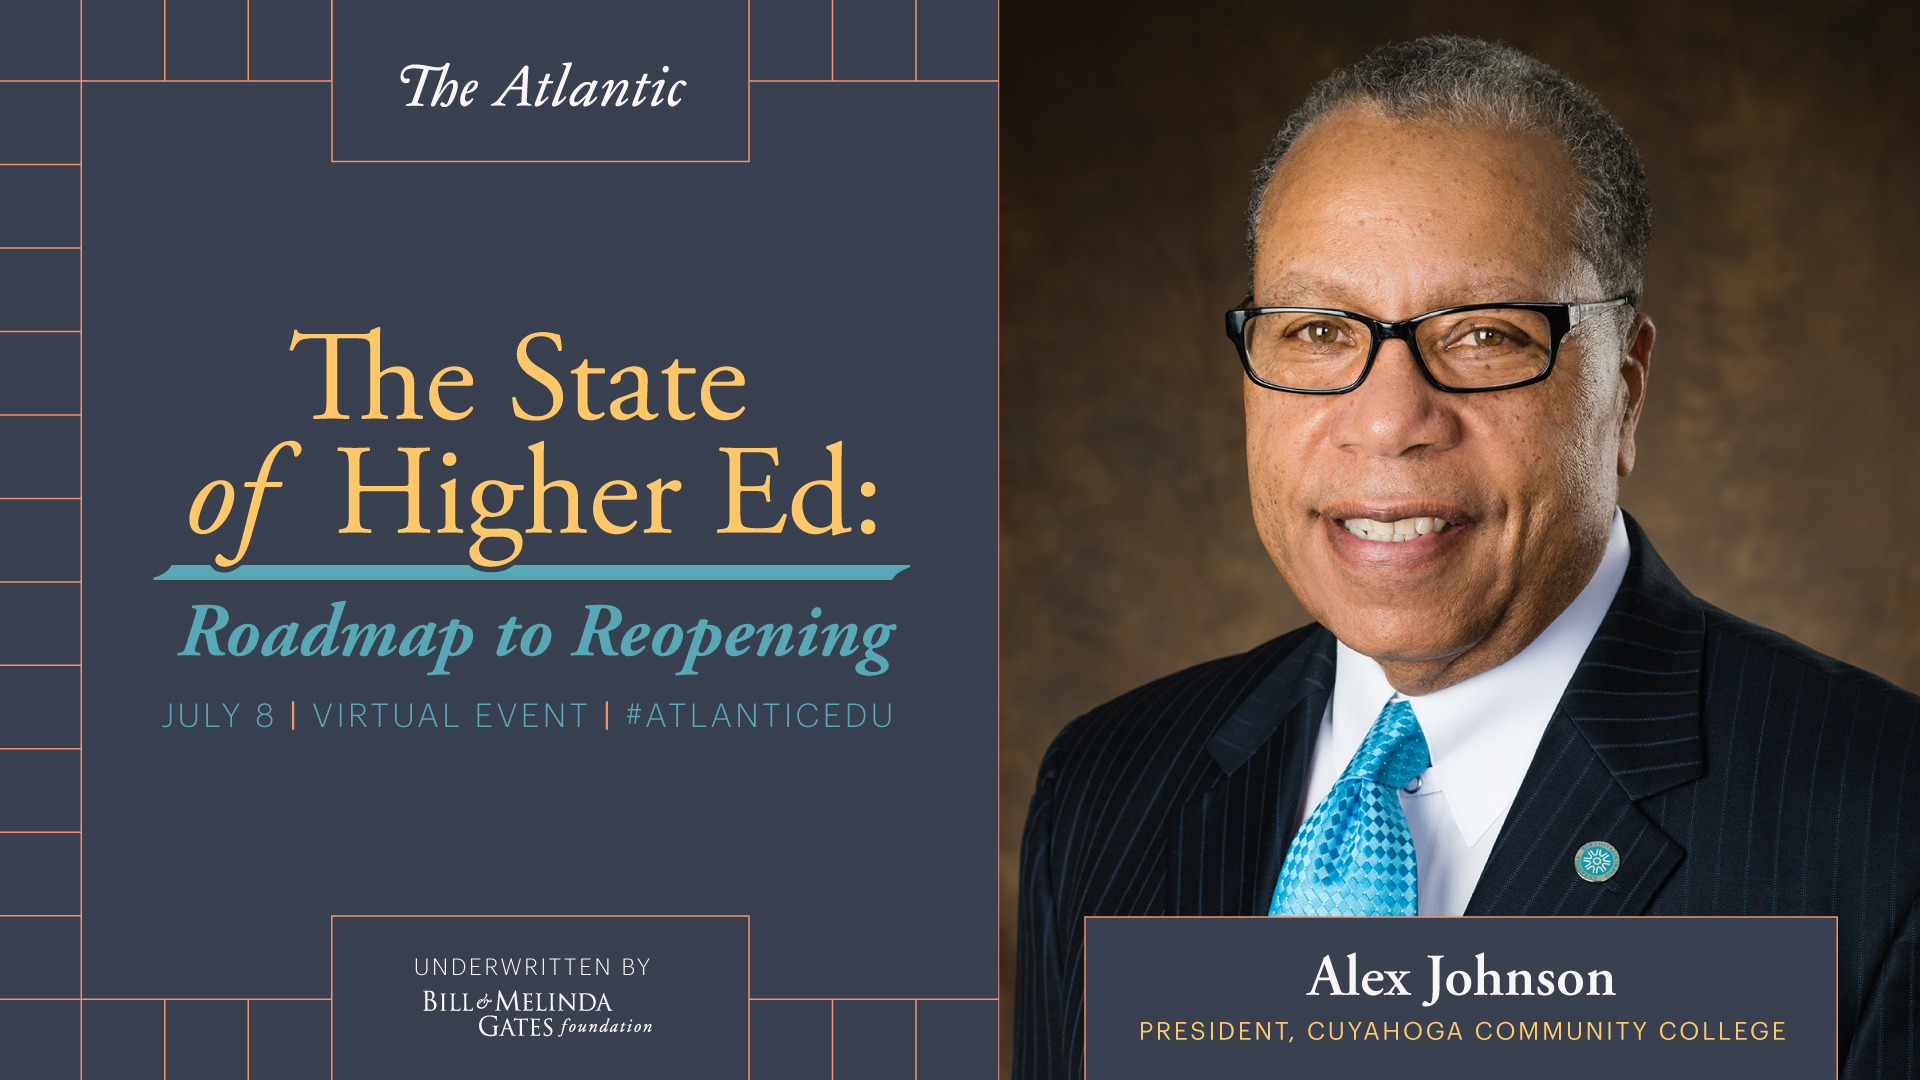 Dr. Johnson to join The Atlantic discussion